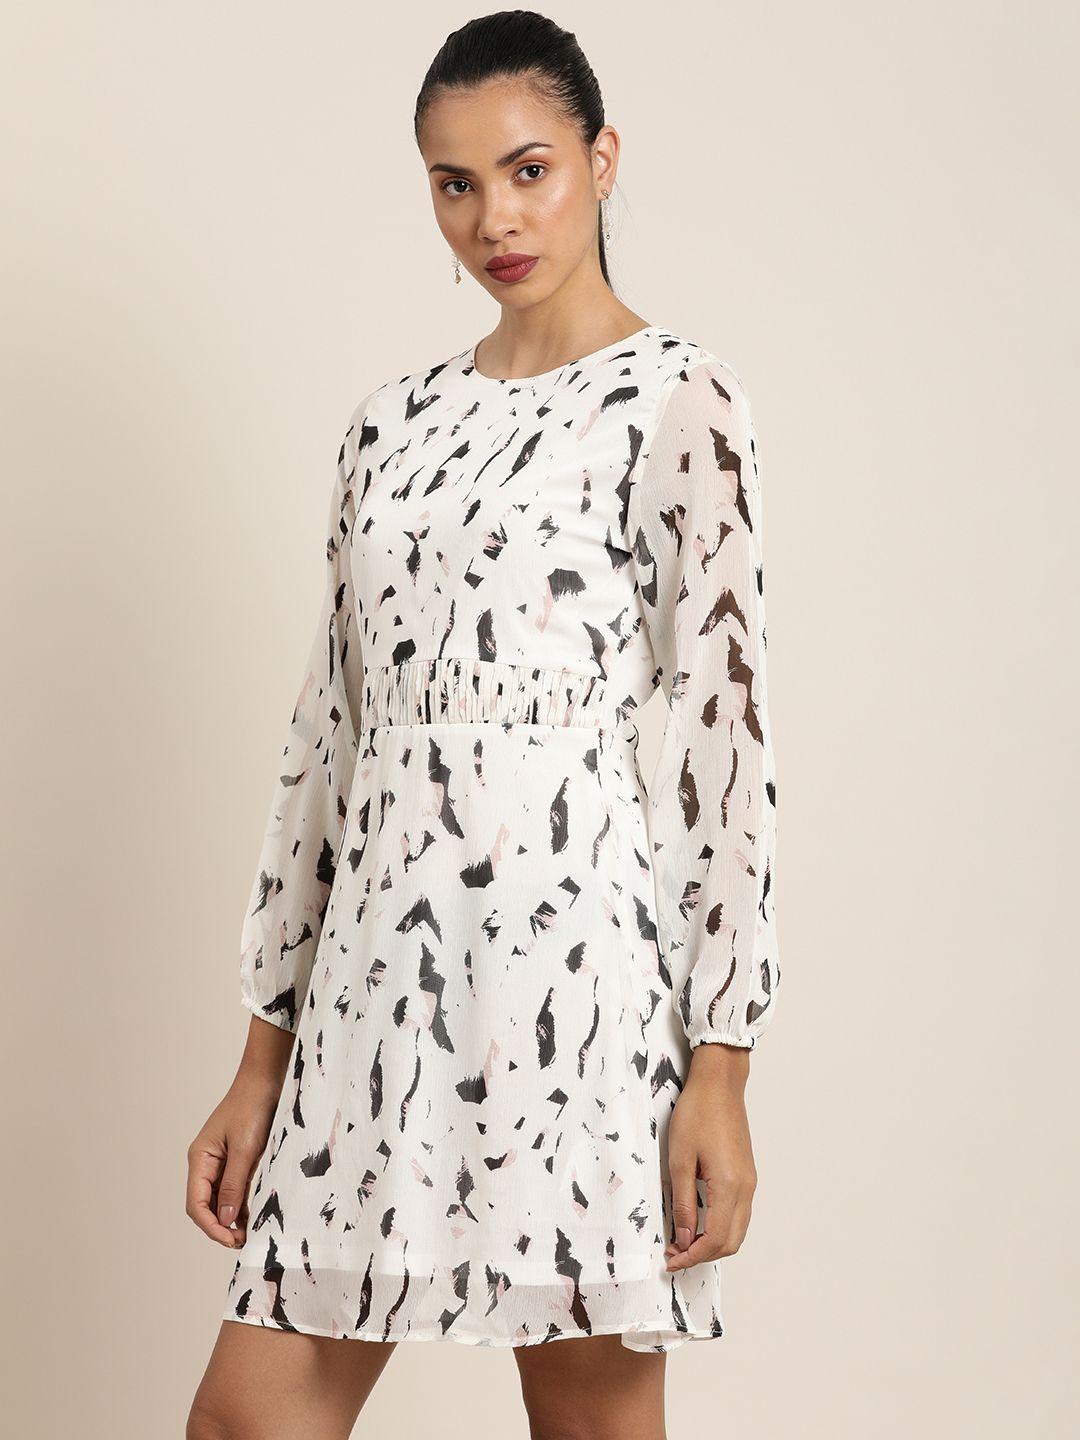 her by invictus women off-white & black printed fit and flare dress